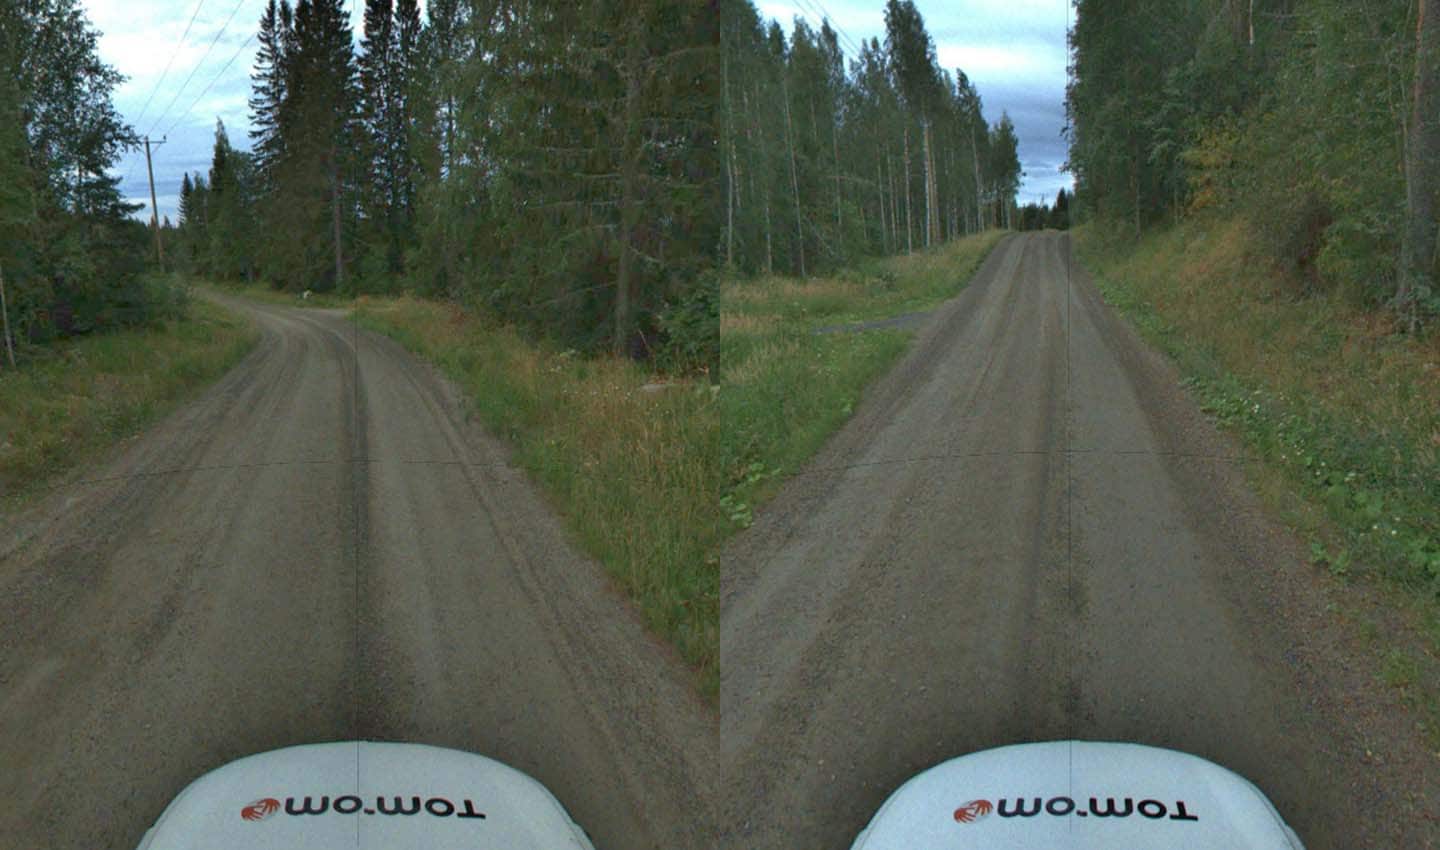 The unpaved road to Koli National Park, it’s a beautiful scenic drive, but one for skilled and experienced drivers.